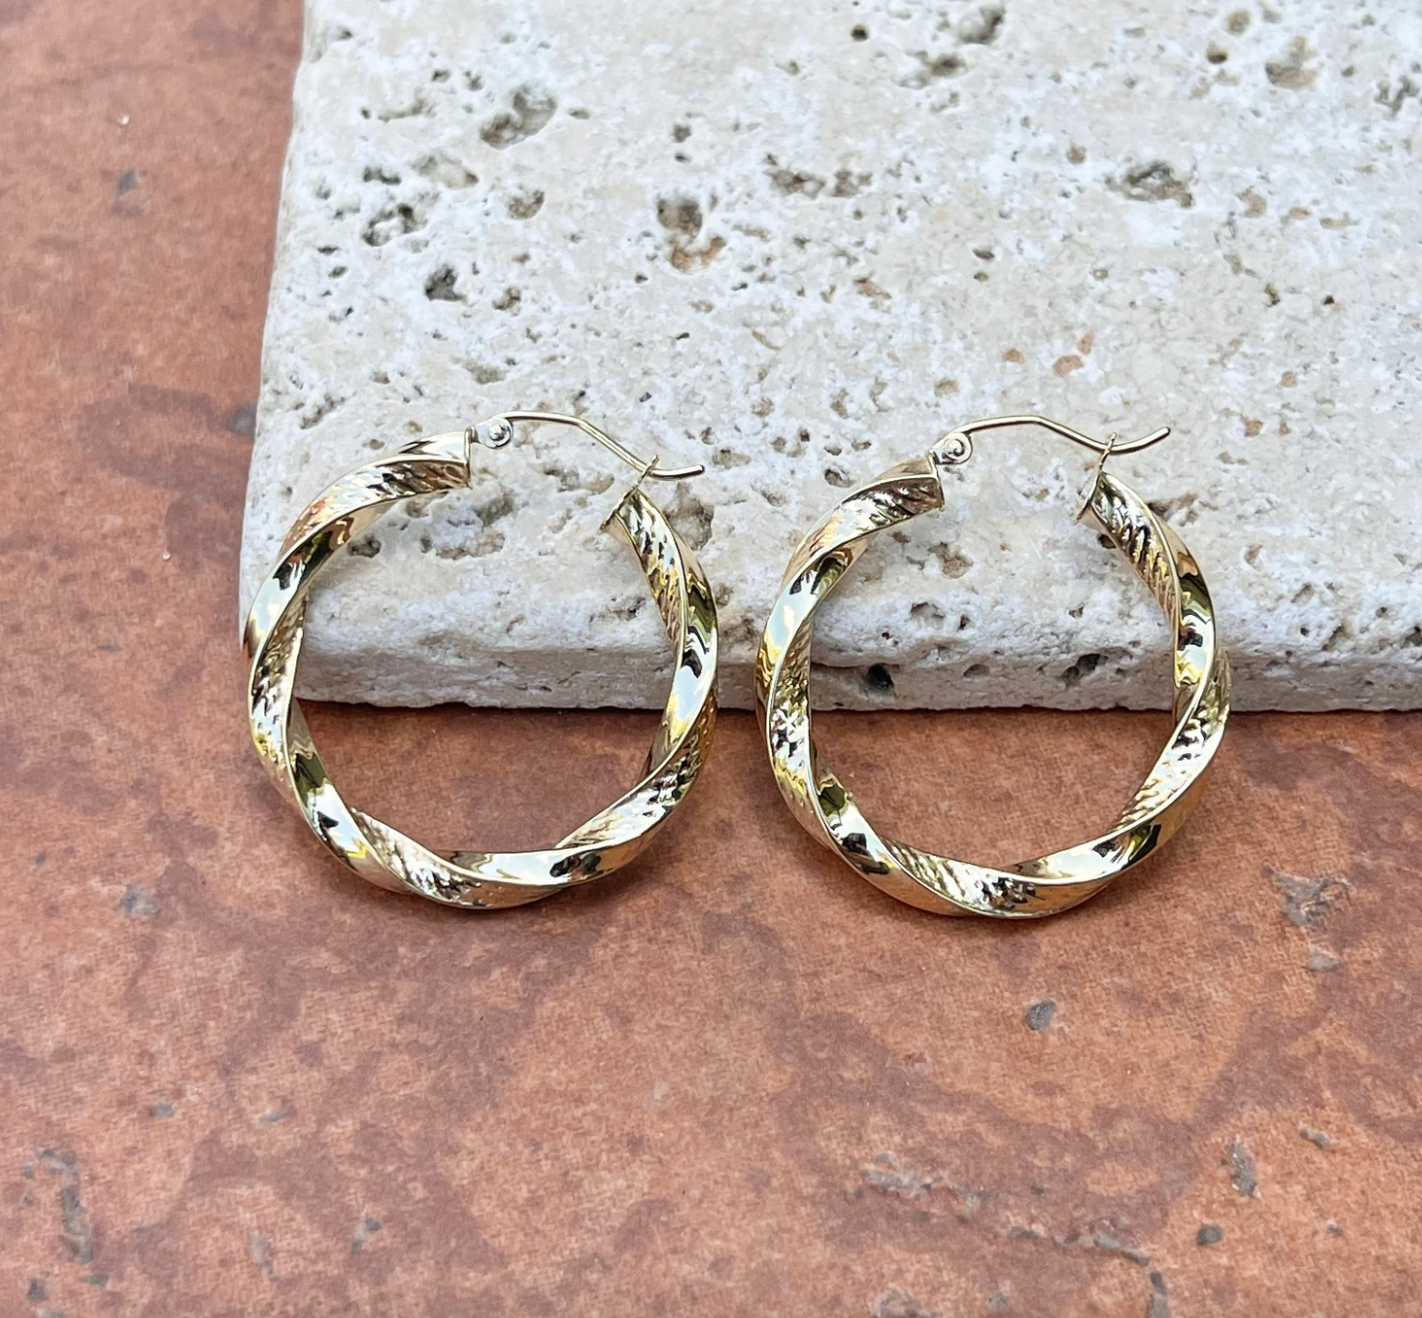 10KT Yellow Gold Twisted Textured Tube Round Hoop Earrings 30mm